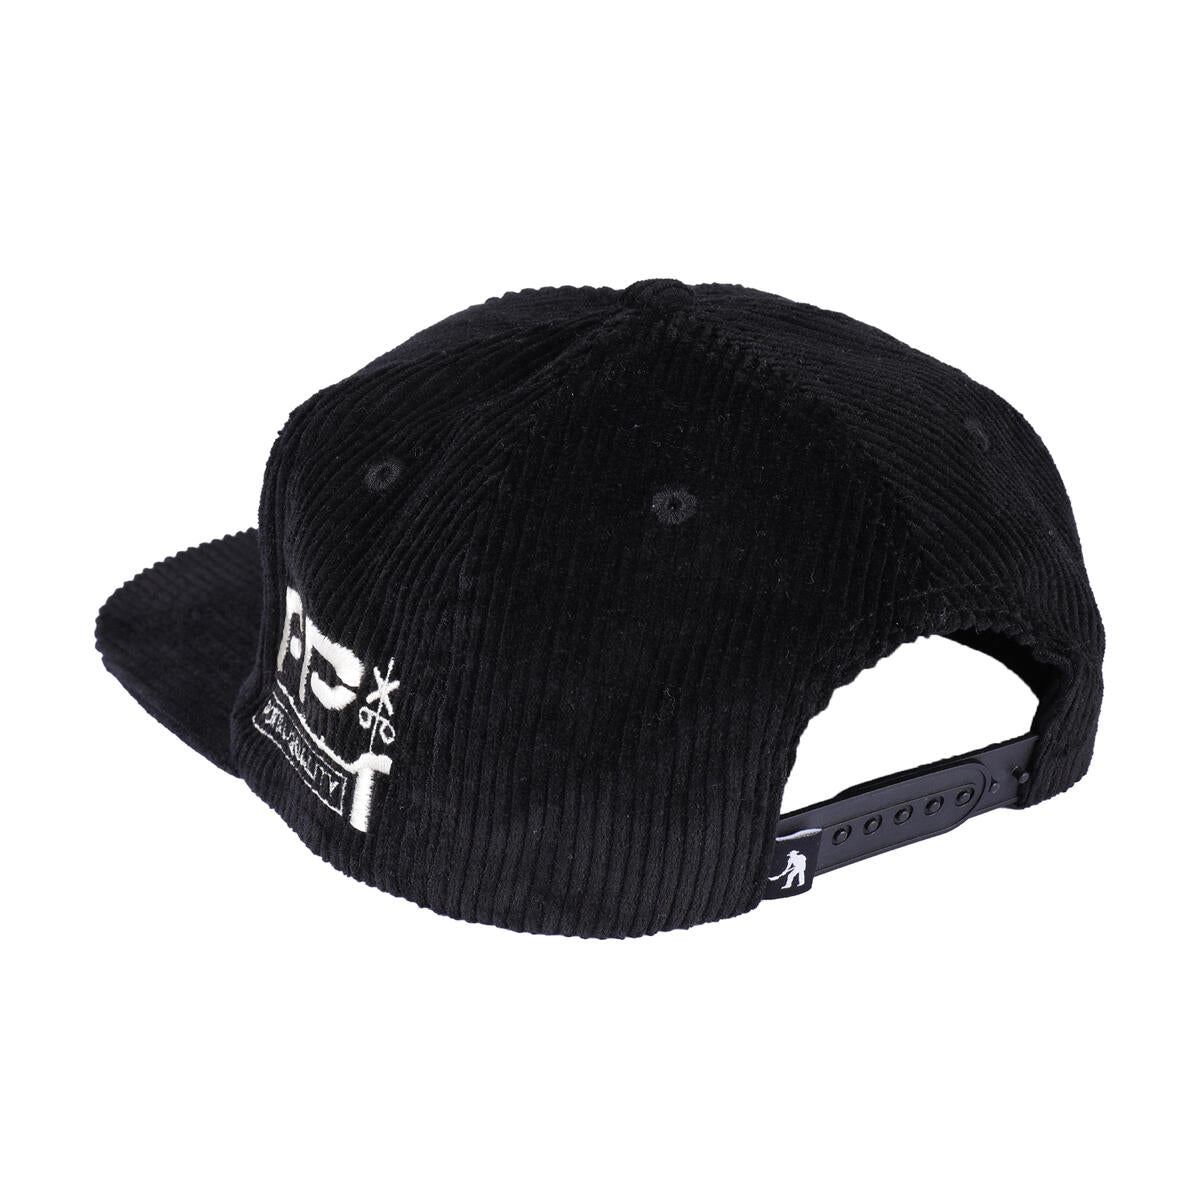 PASS~PORT SKATEBOARDS LONG CON WORKERS CAP BLACK